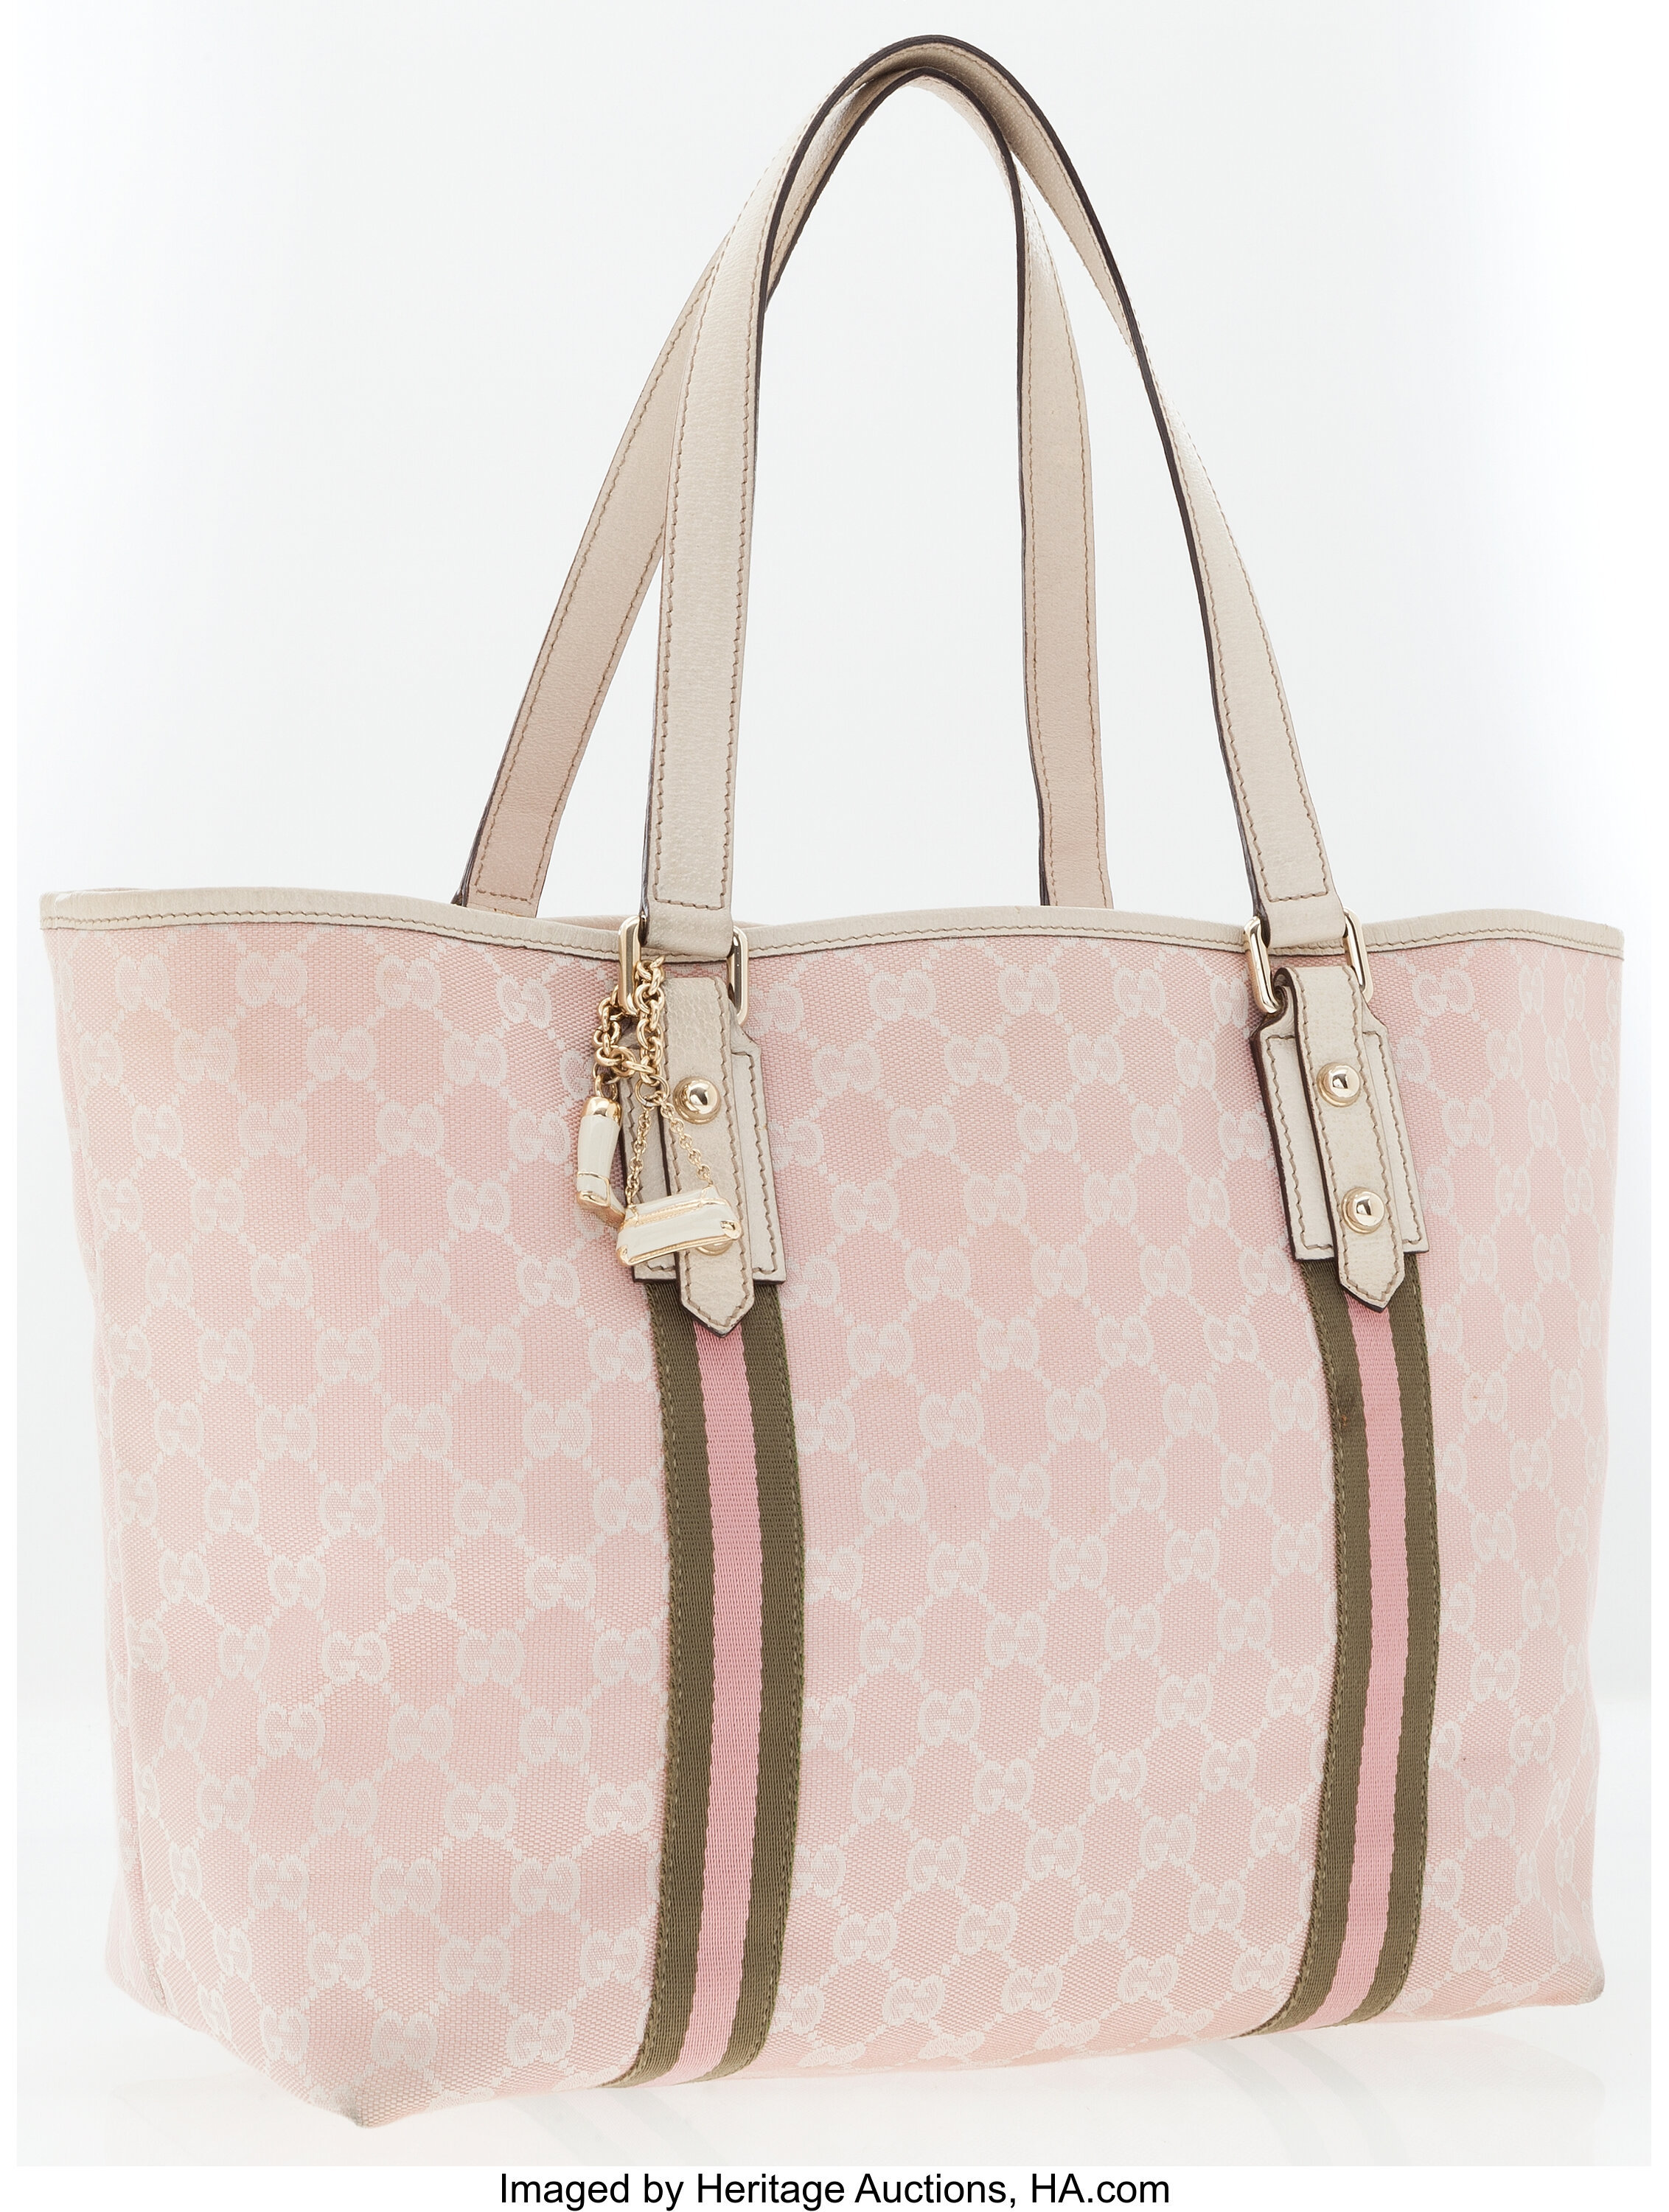 Gucci Pink GG Monogram Canvas Tote Bag . ... Luxury Accessories | Lot  #79058 | Heritage Auctions